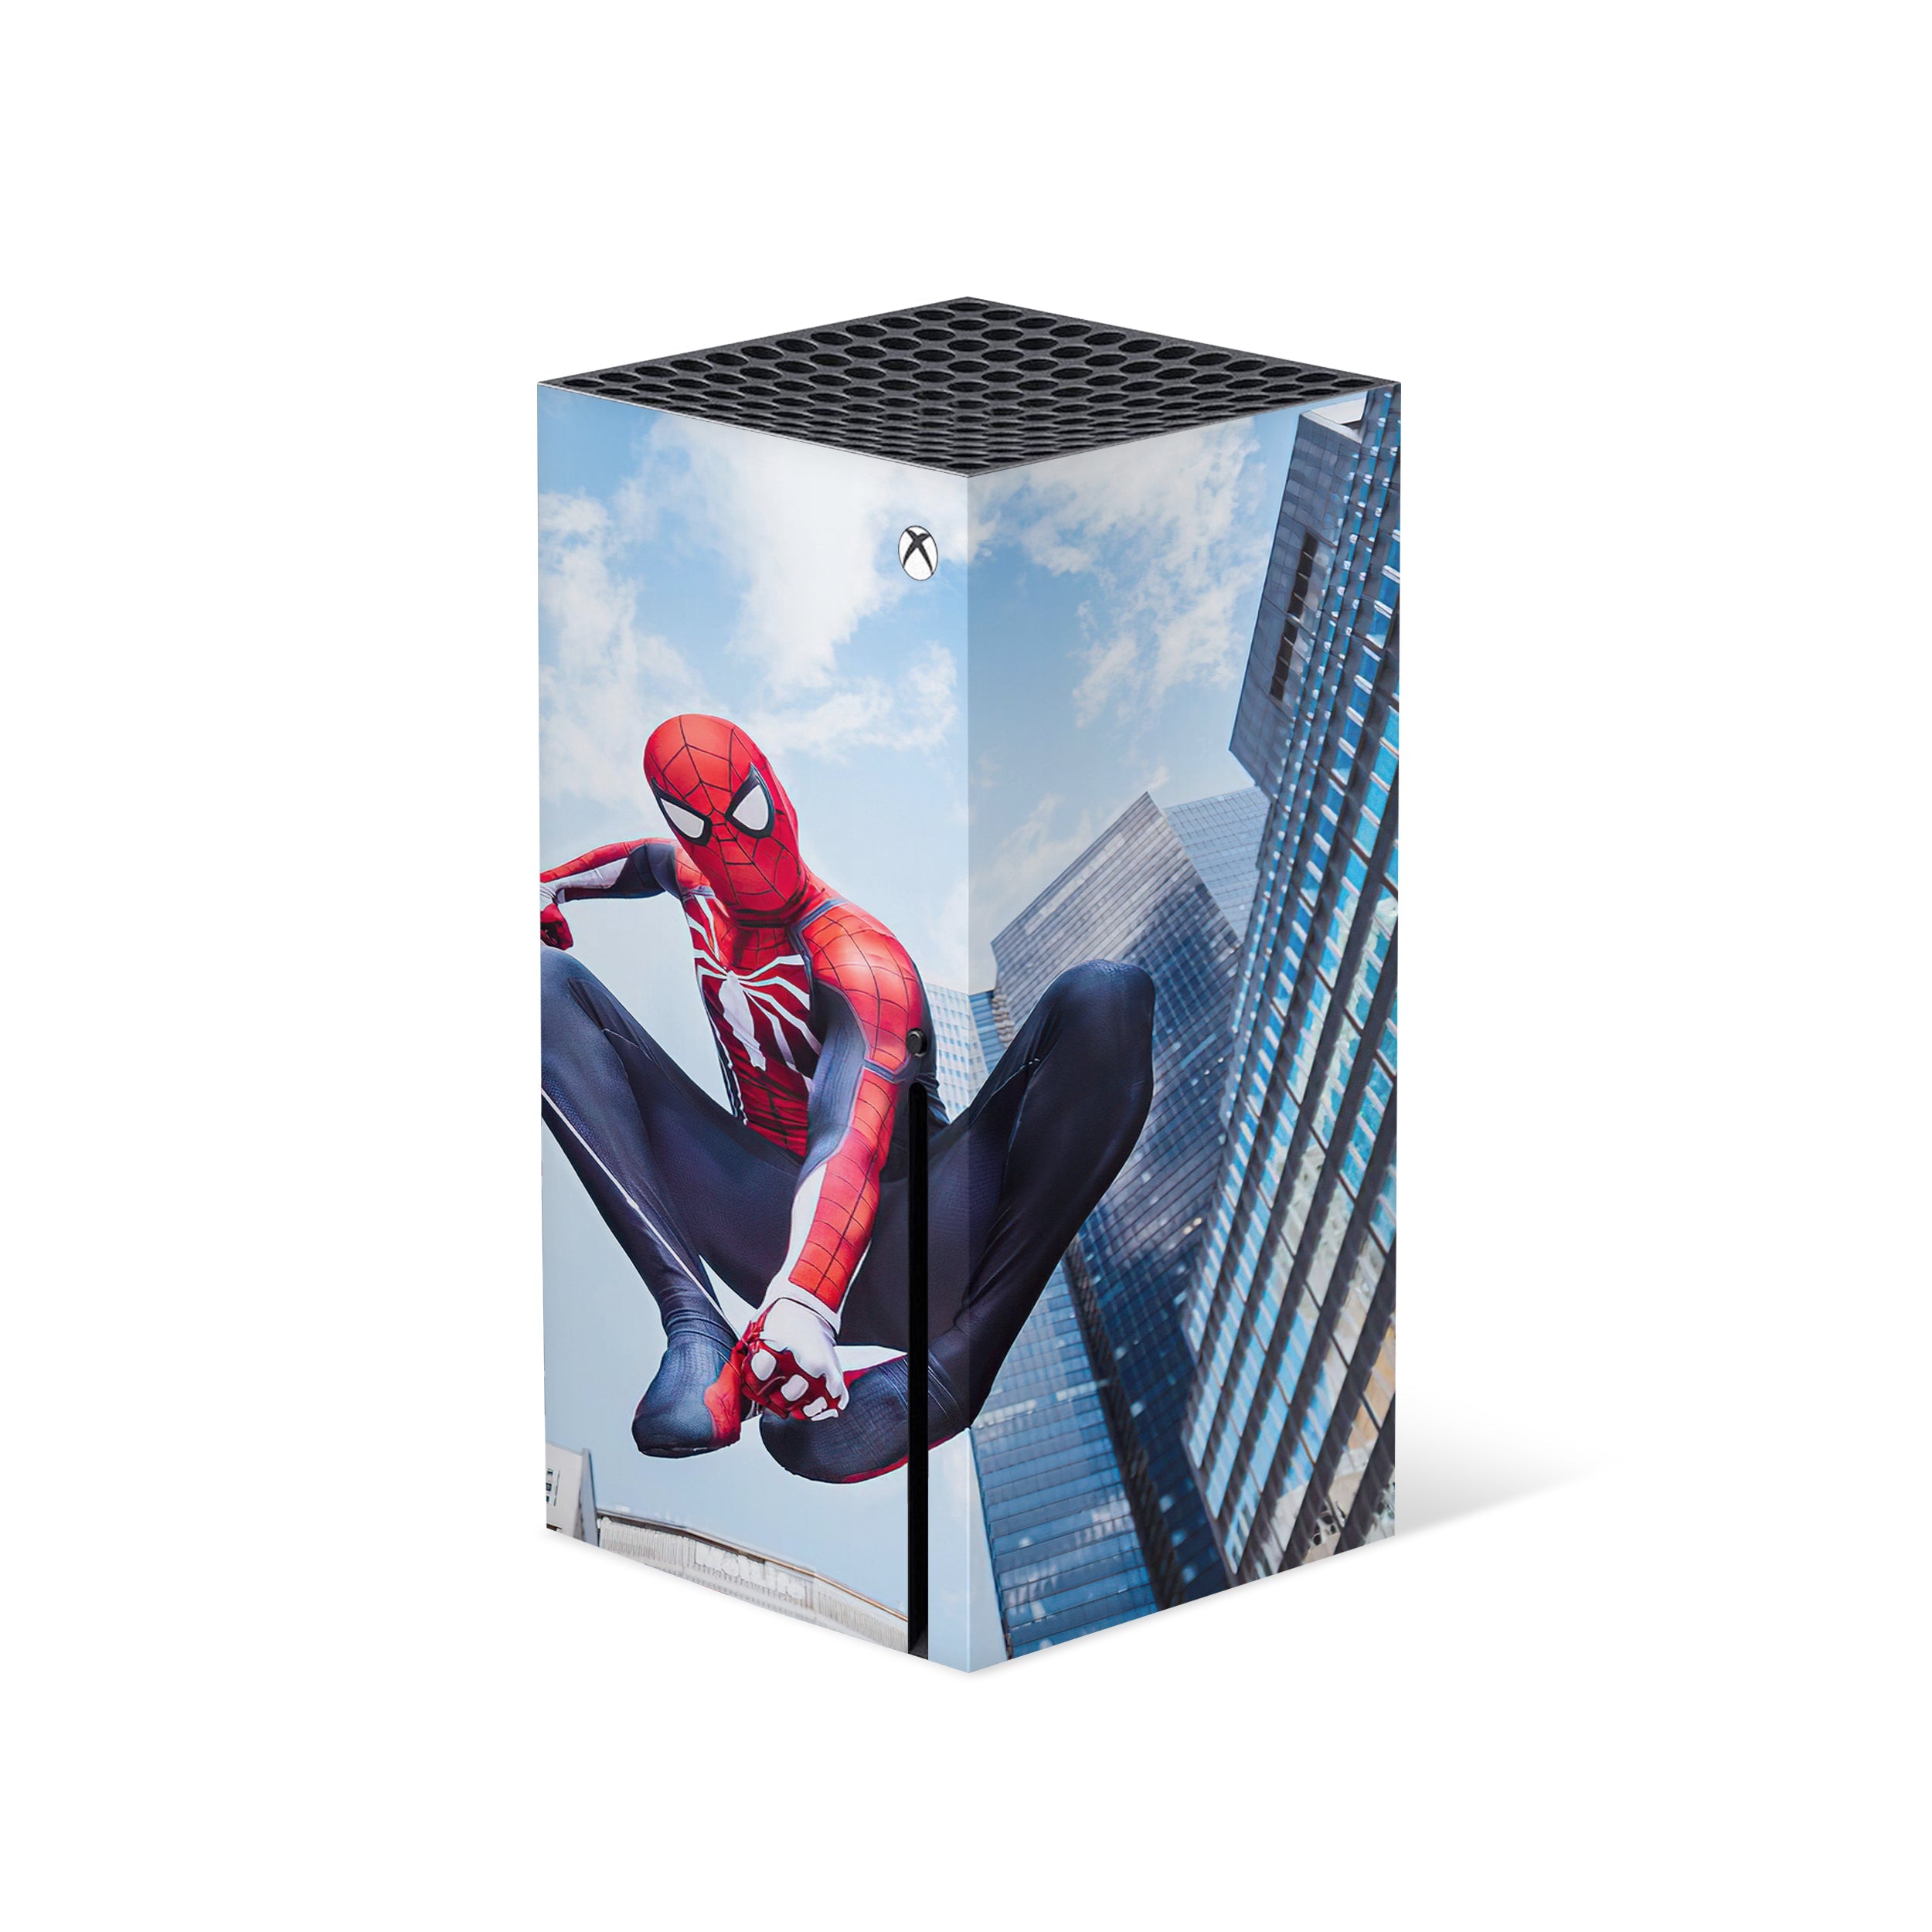 A video game skin featuring a Marvel Comics Spider Man design for the Xbox Series X.